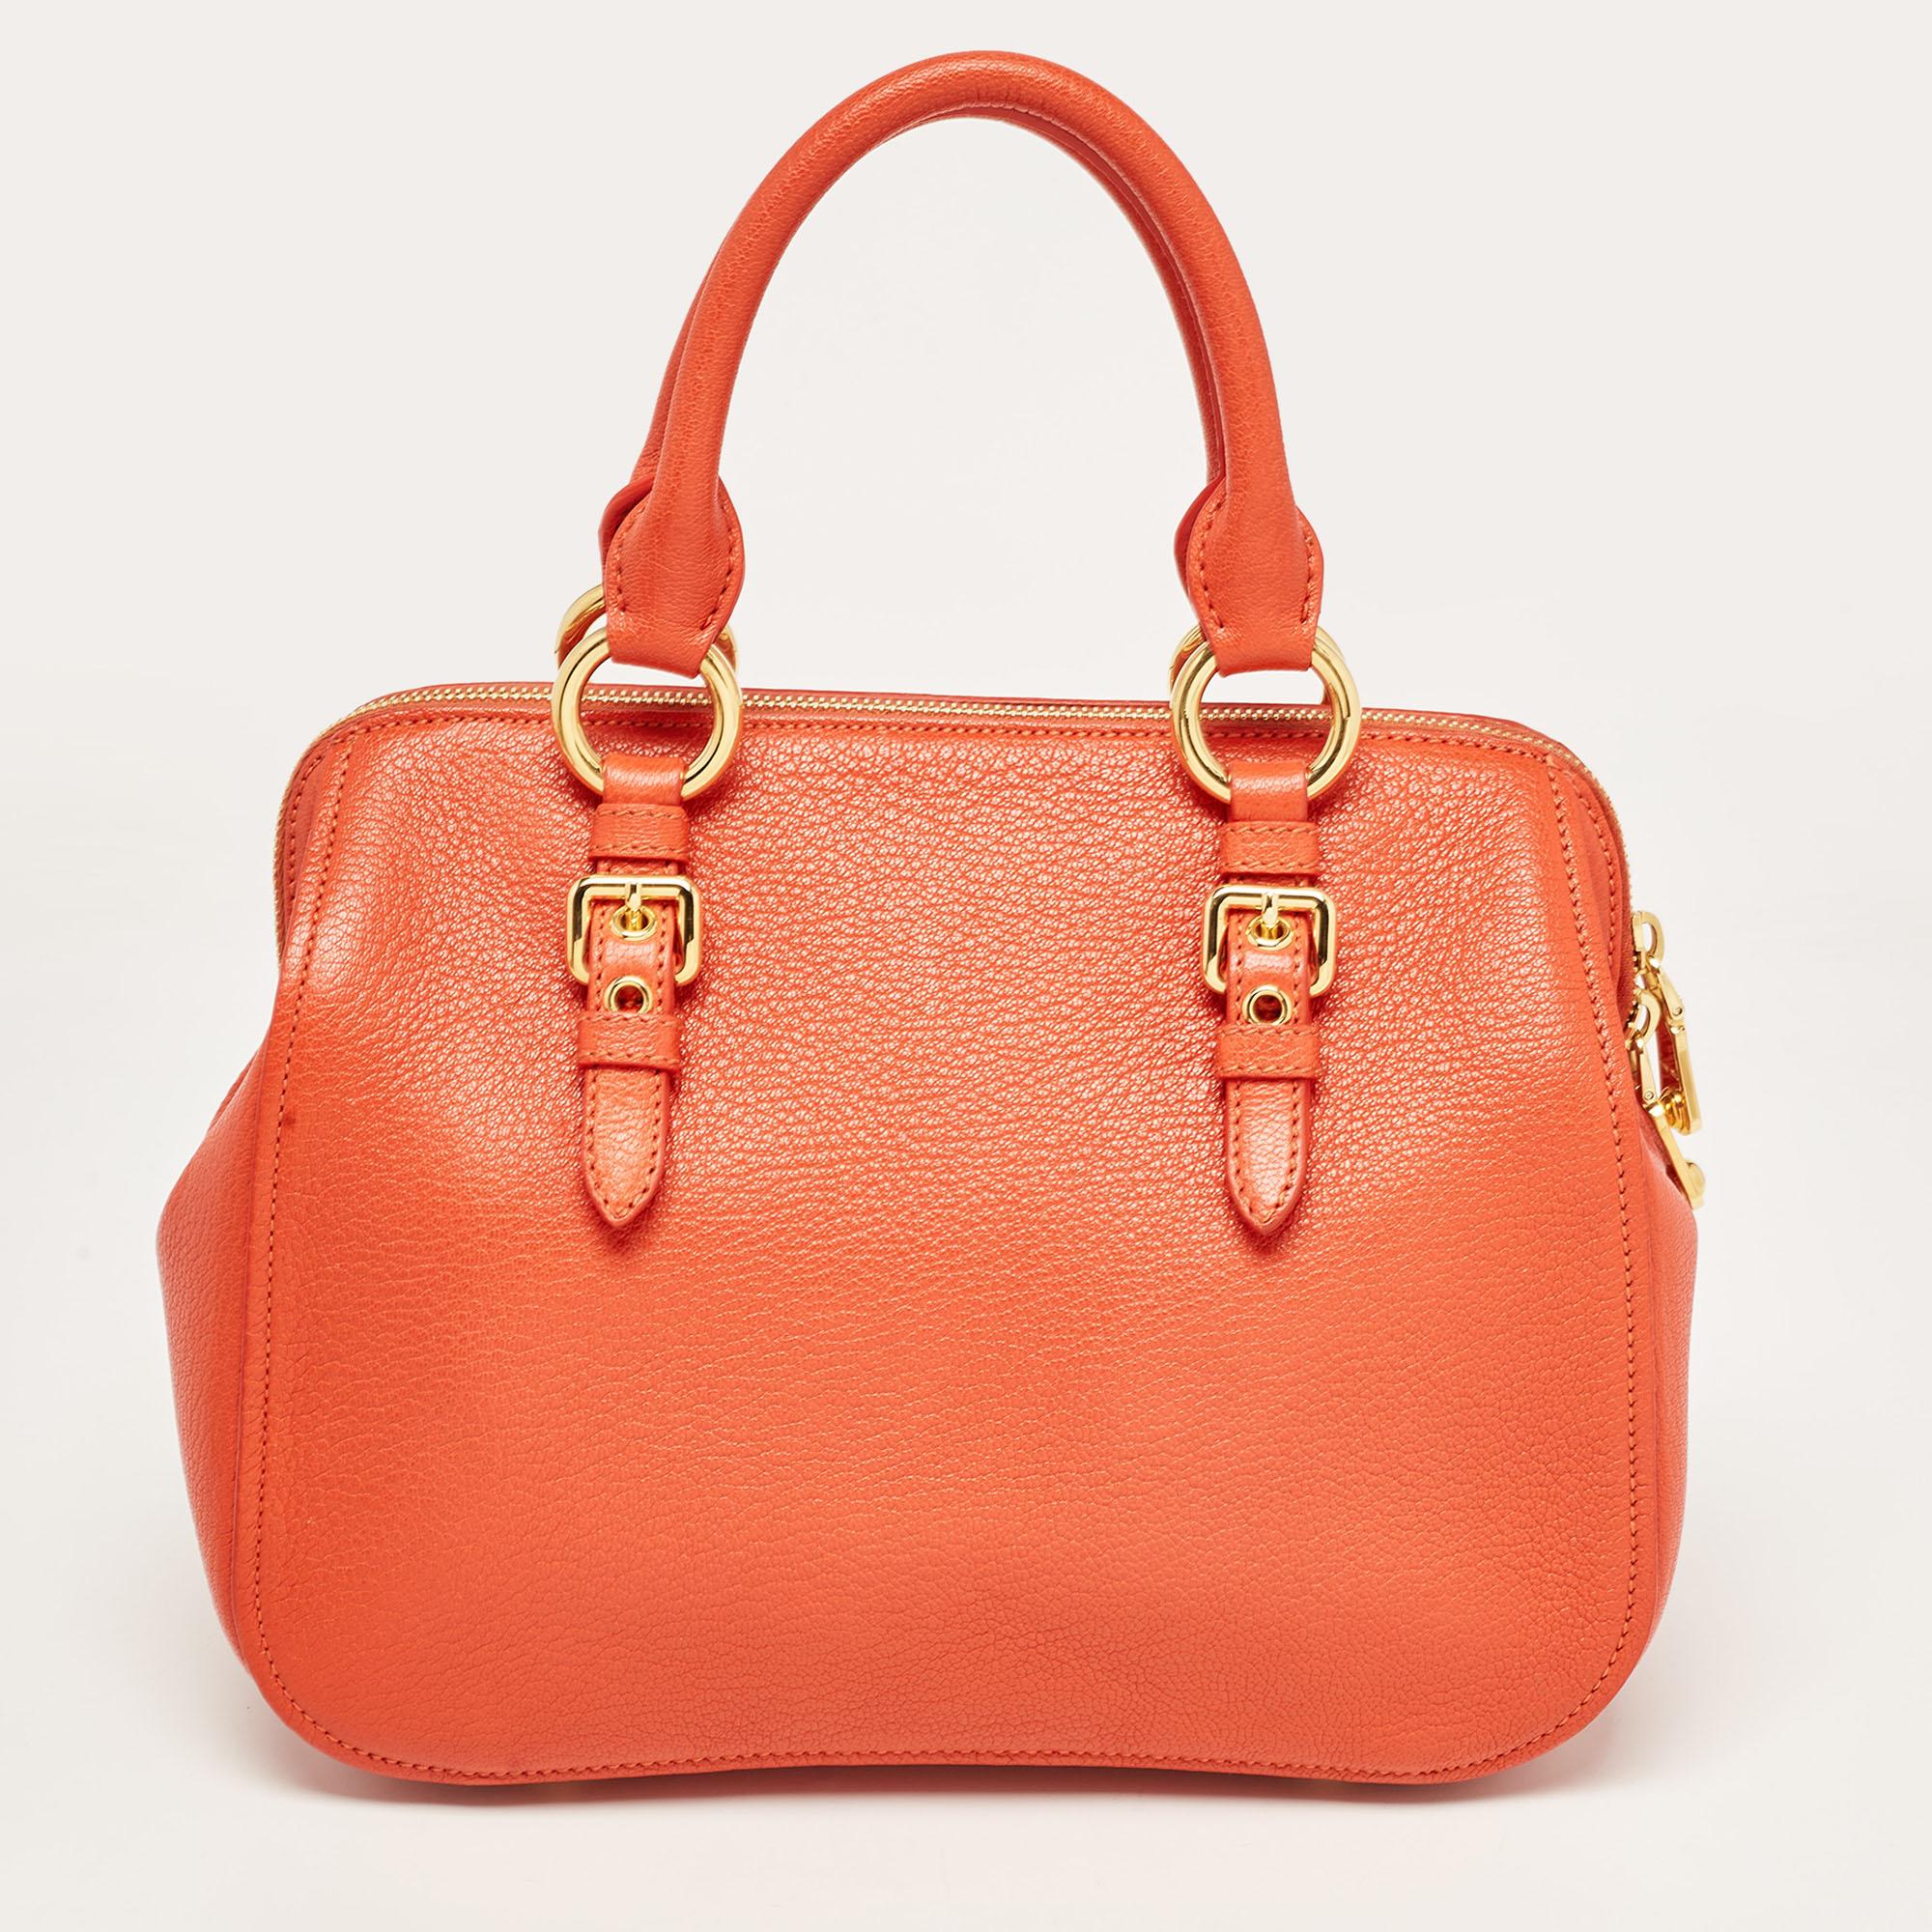 Simple and classy, style your outfit with this orange bag from Miu Miu. Crafted from leather, the bag is held by dual handles and a shoulder strap. The zip closure opens to a satin-lined interior that can hold all your essentials in one go. it is